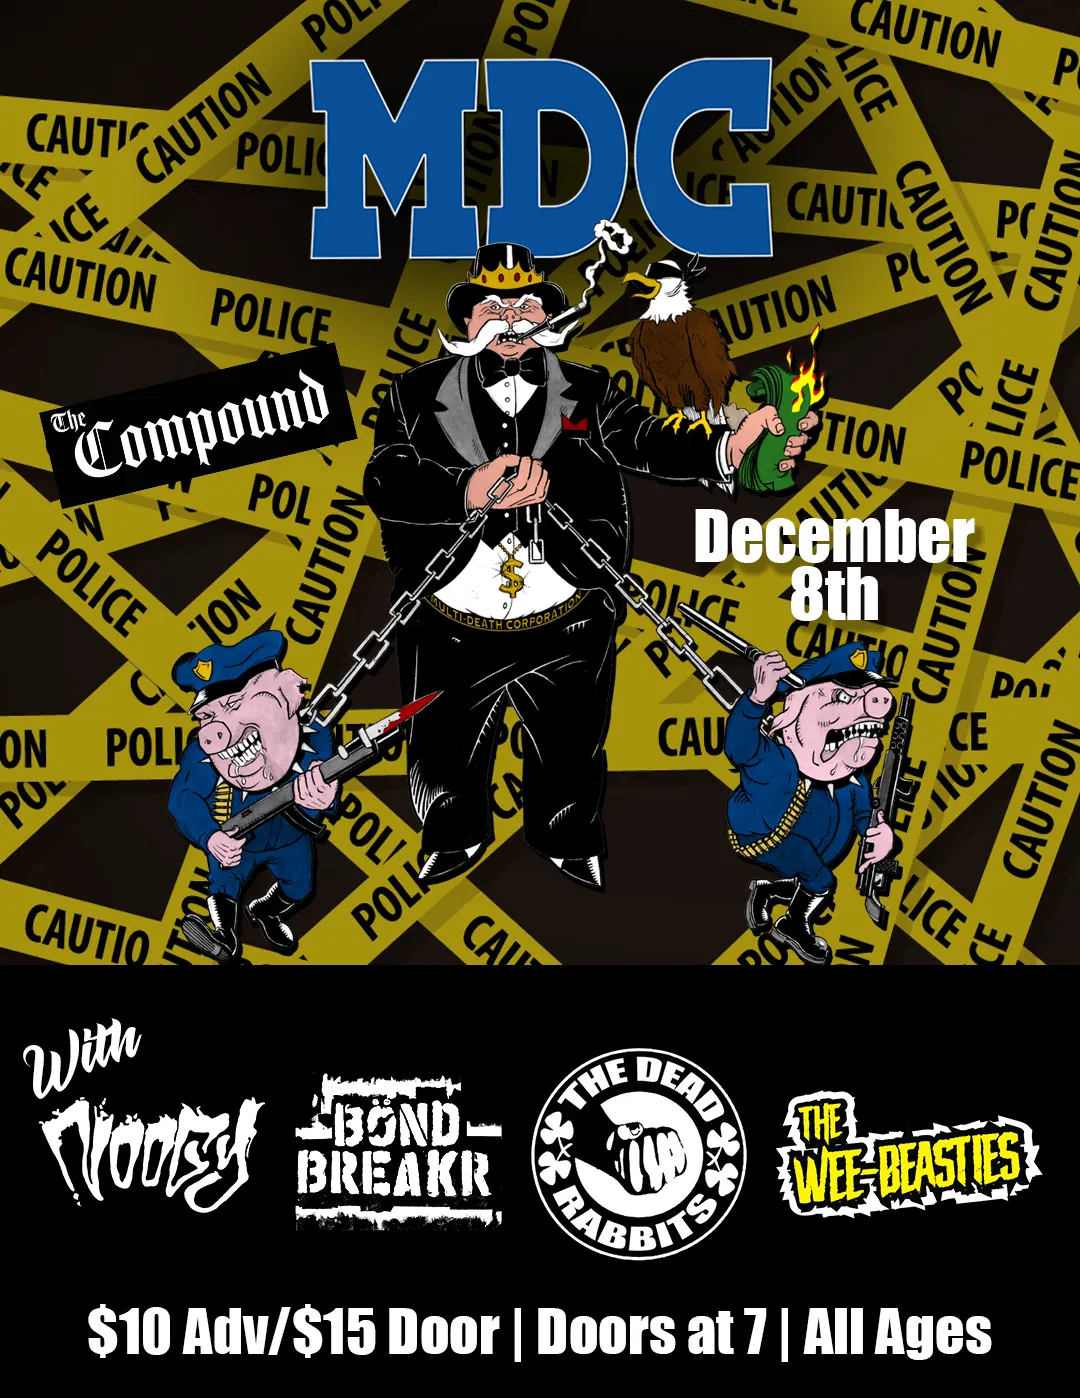 MDC w/ Noogy, Bondbreakr, The Dead Rabbits and The Wee Beasties